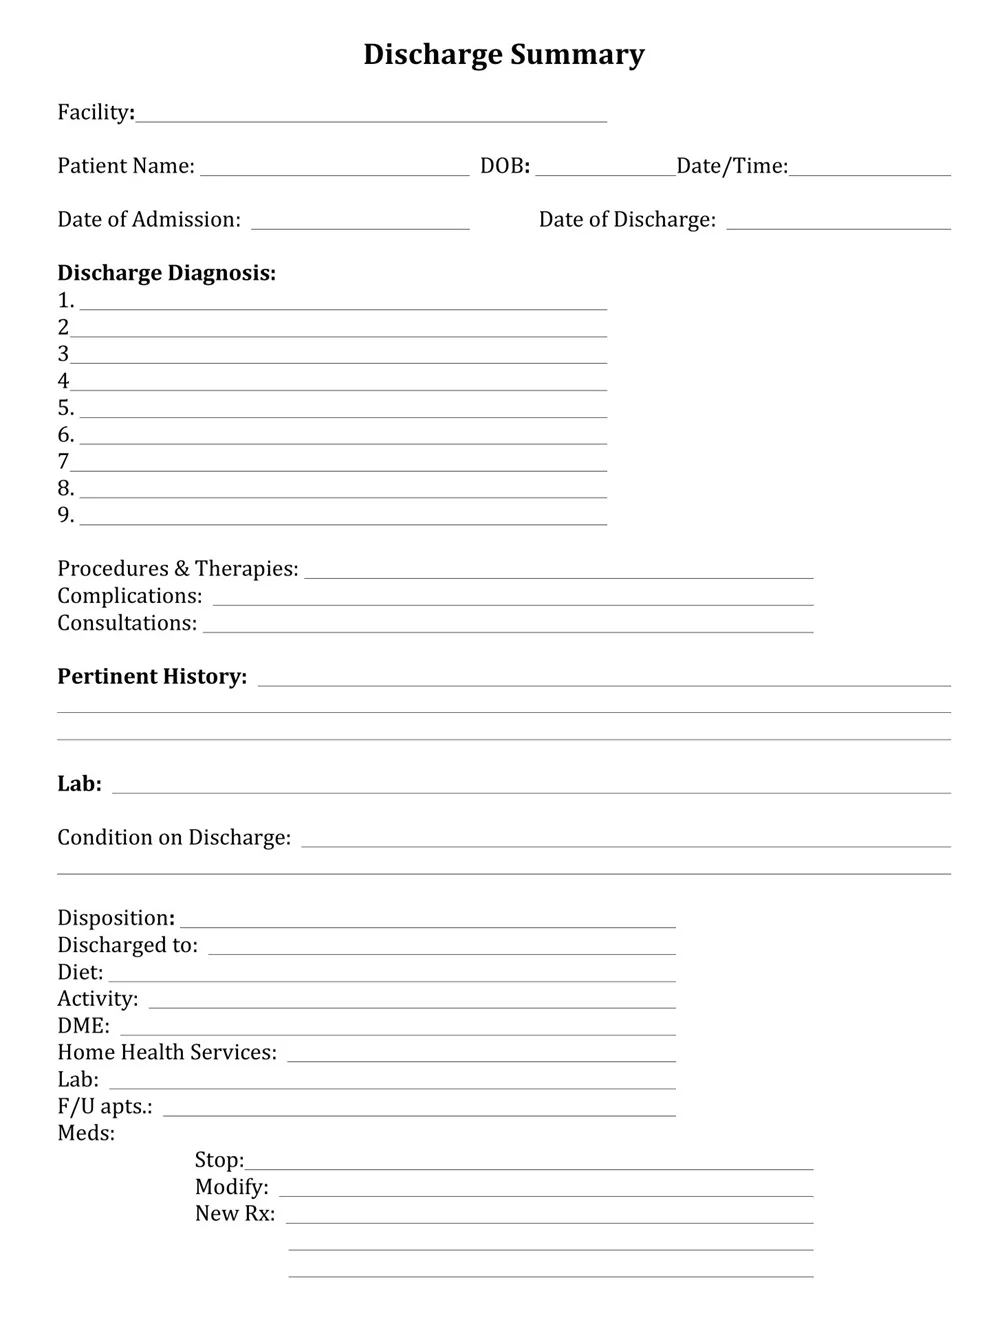 Discharge Summary Template PDF